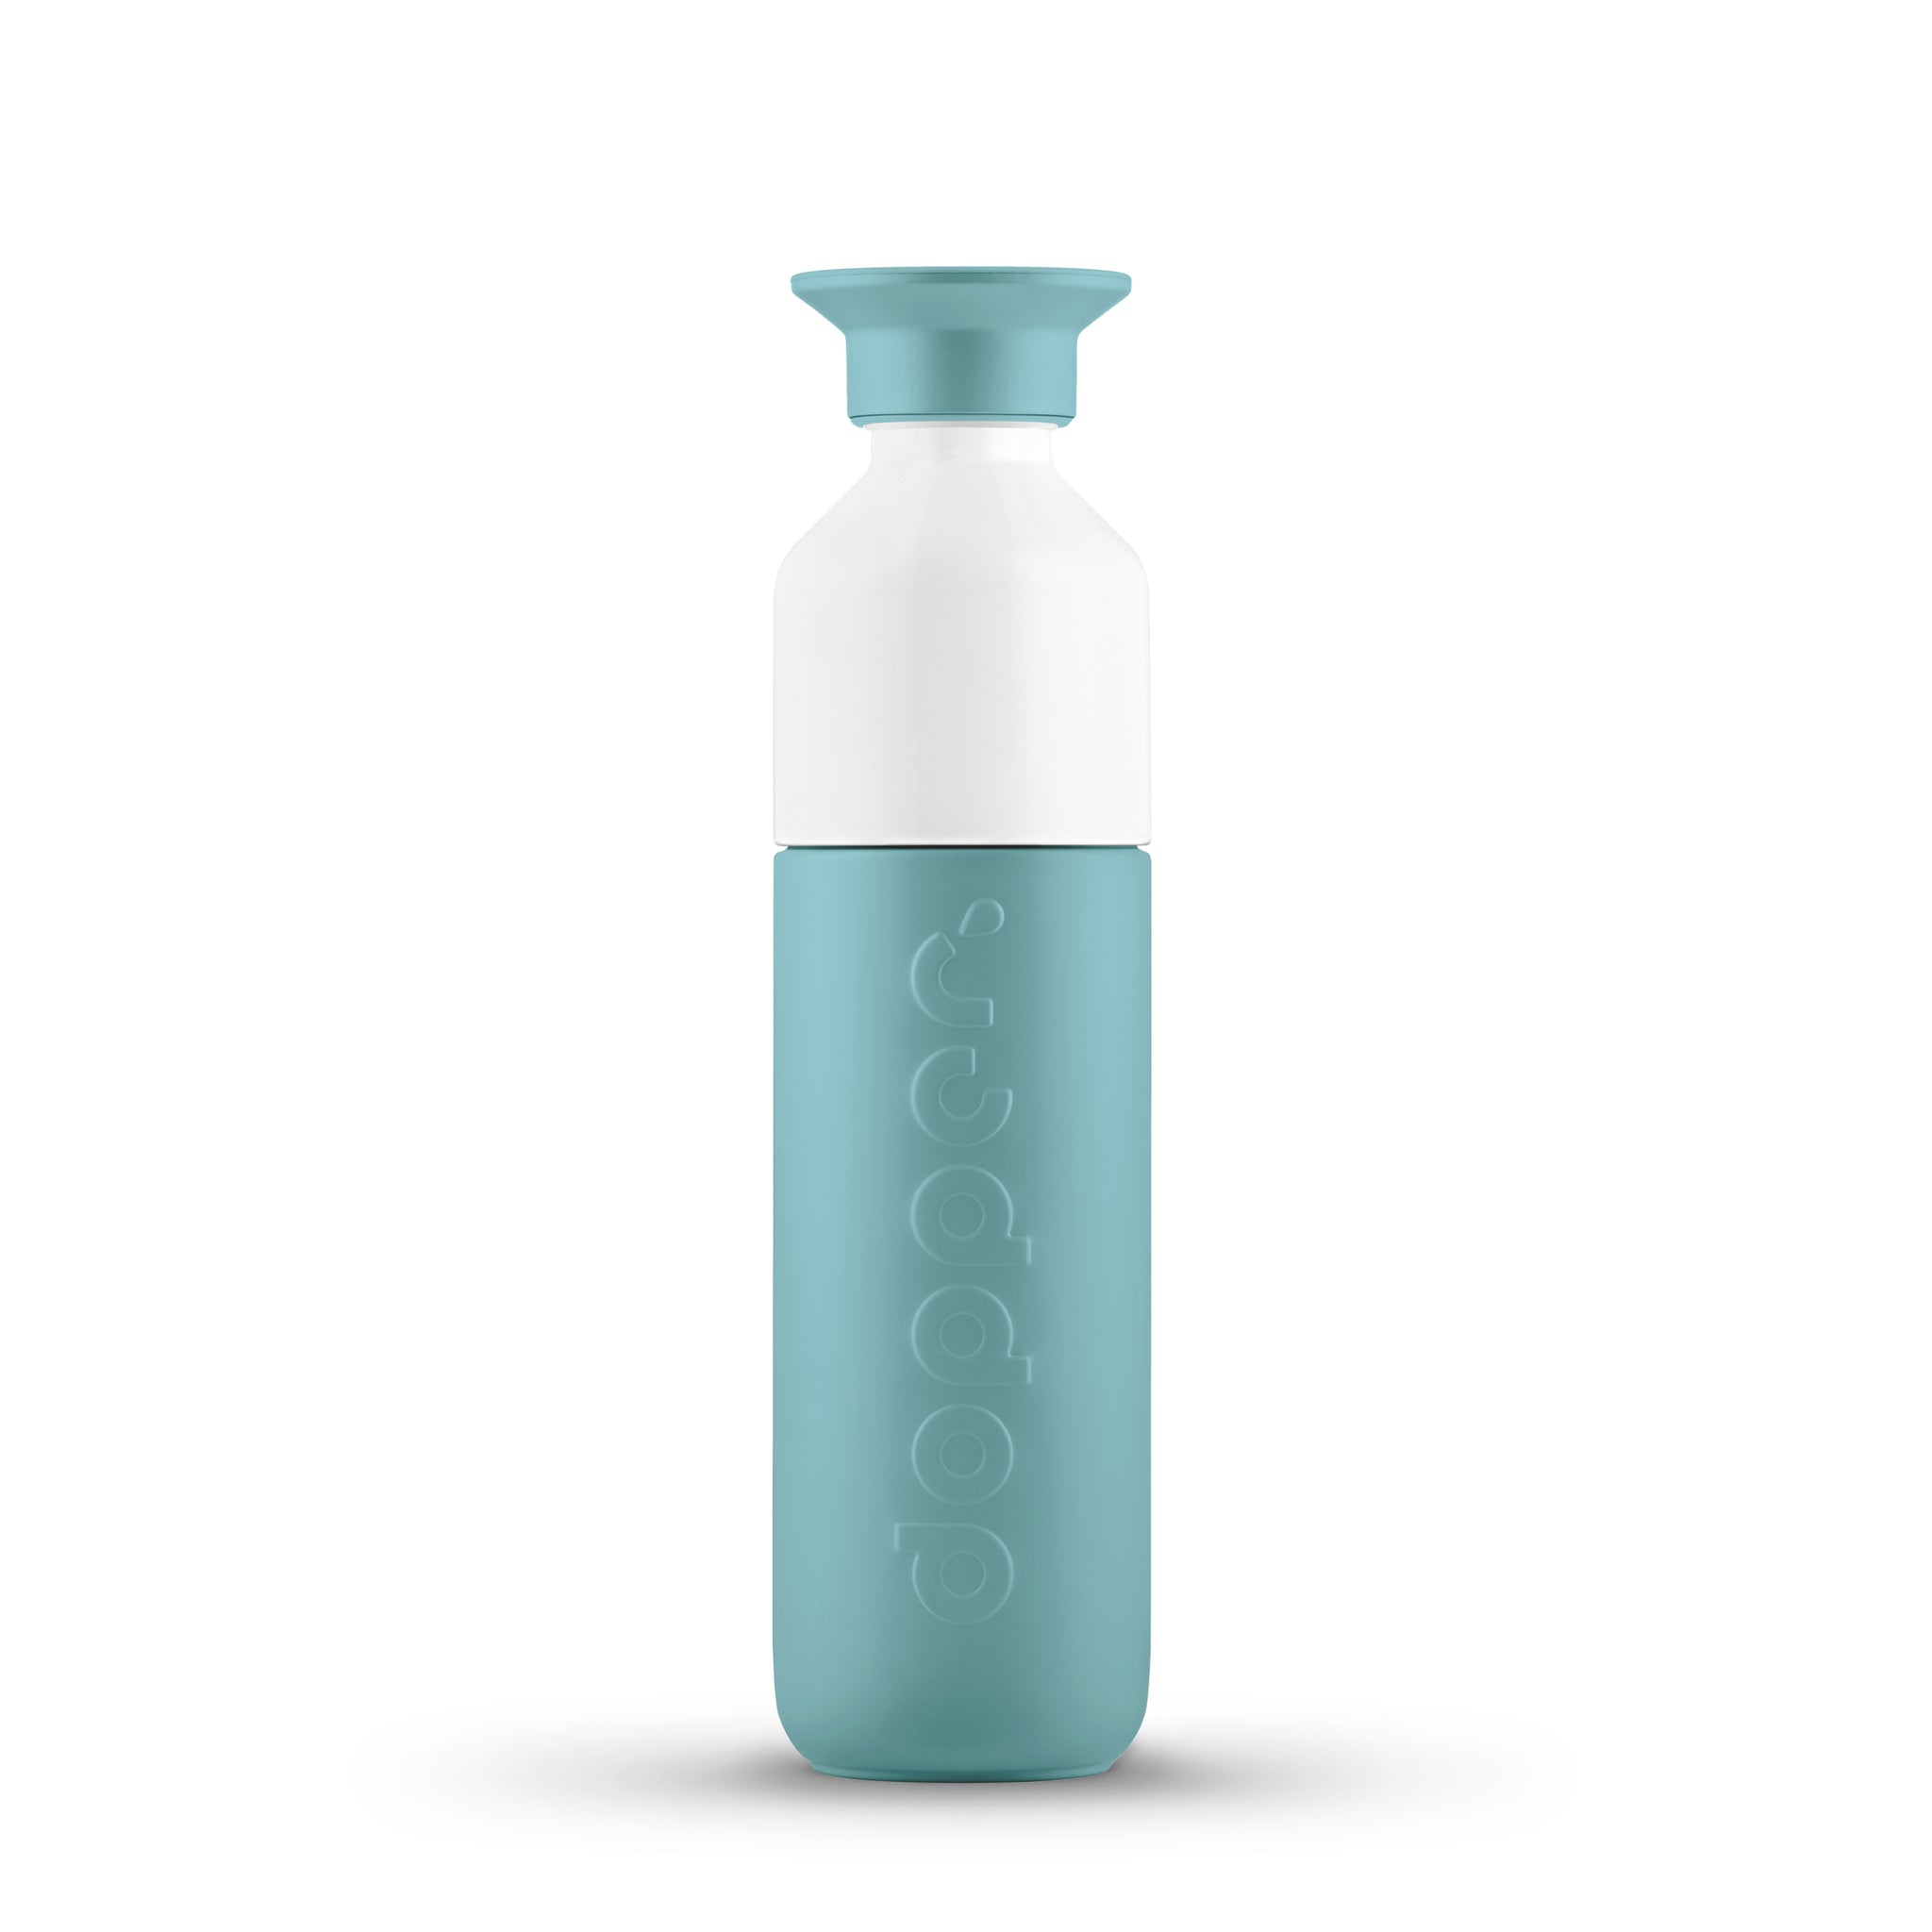 Dopper Insulated Small Bottlenose Blue│Thermosfles 350ml blauw│art. 5296│voorkant met witte achtergrond